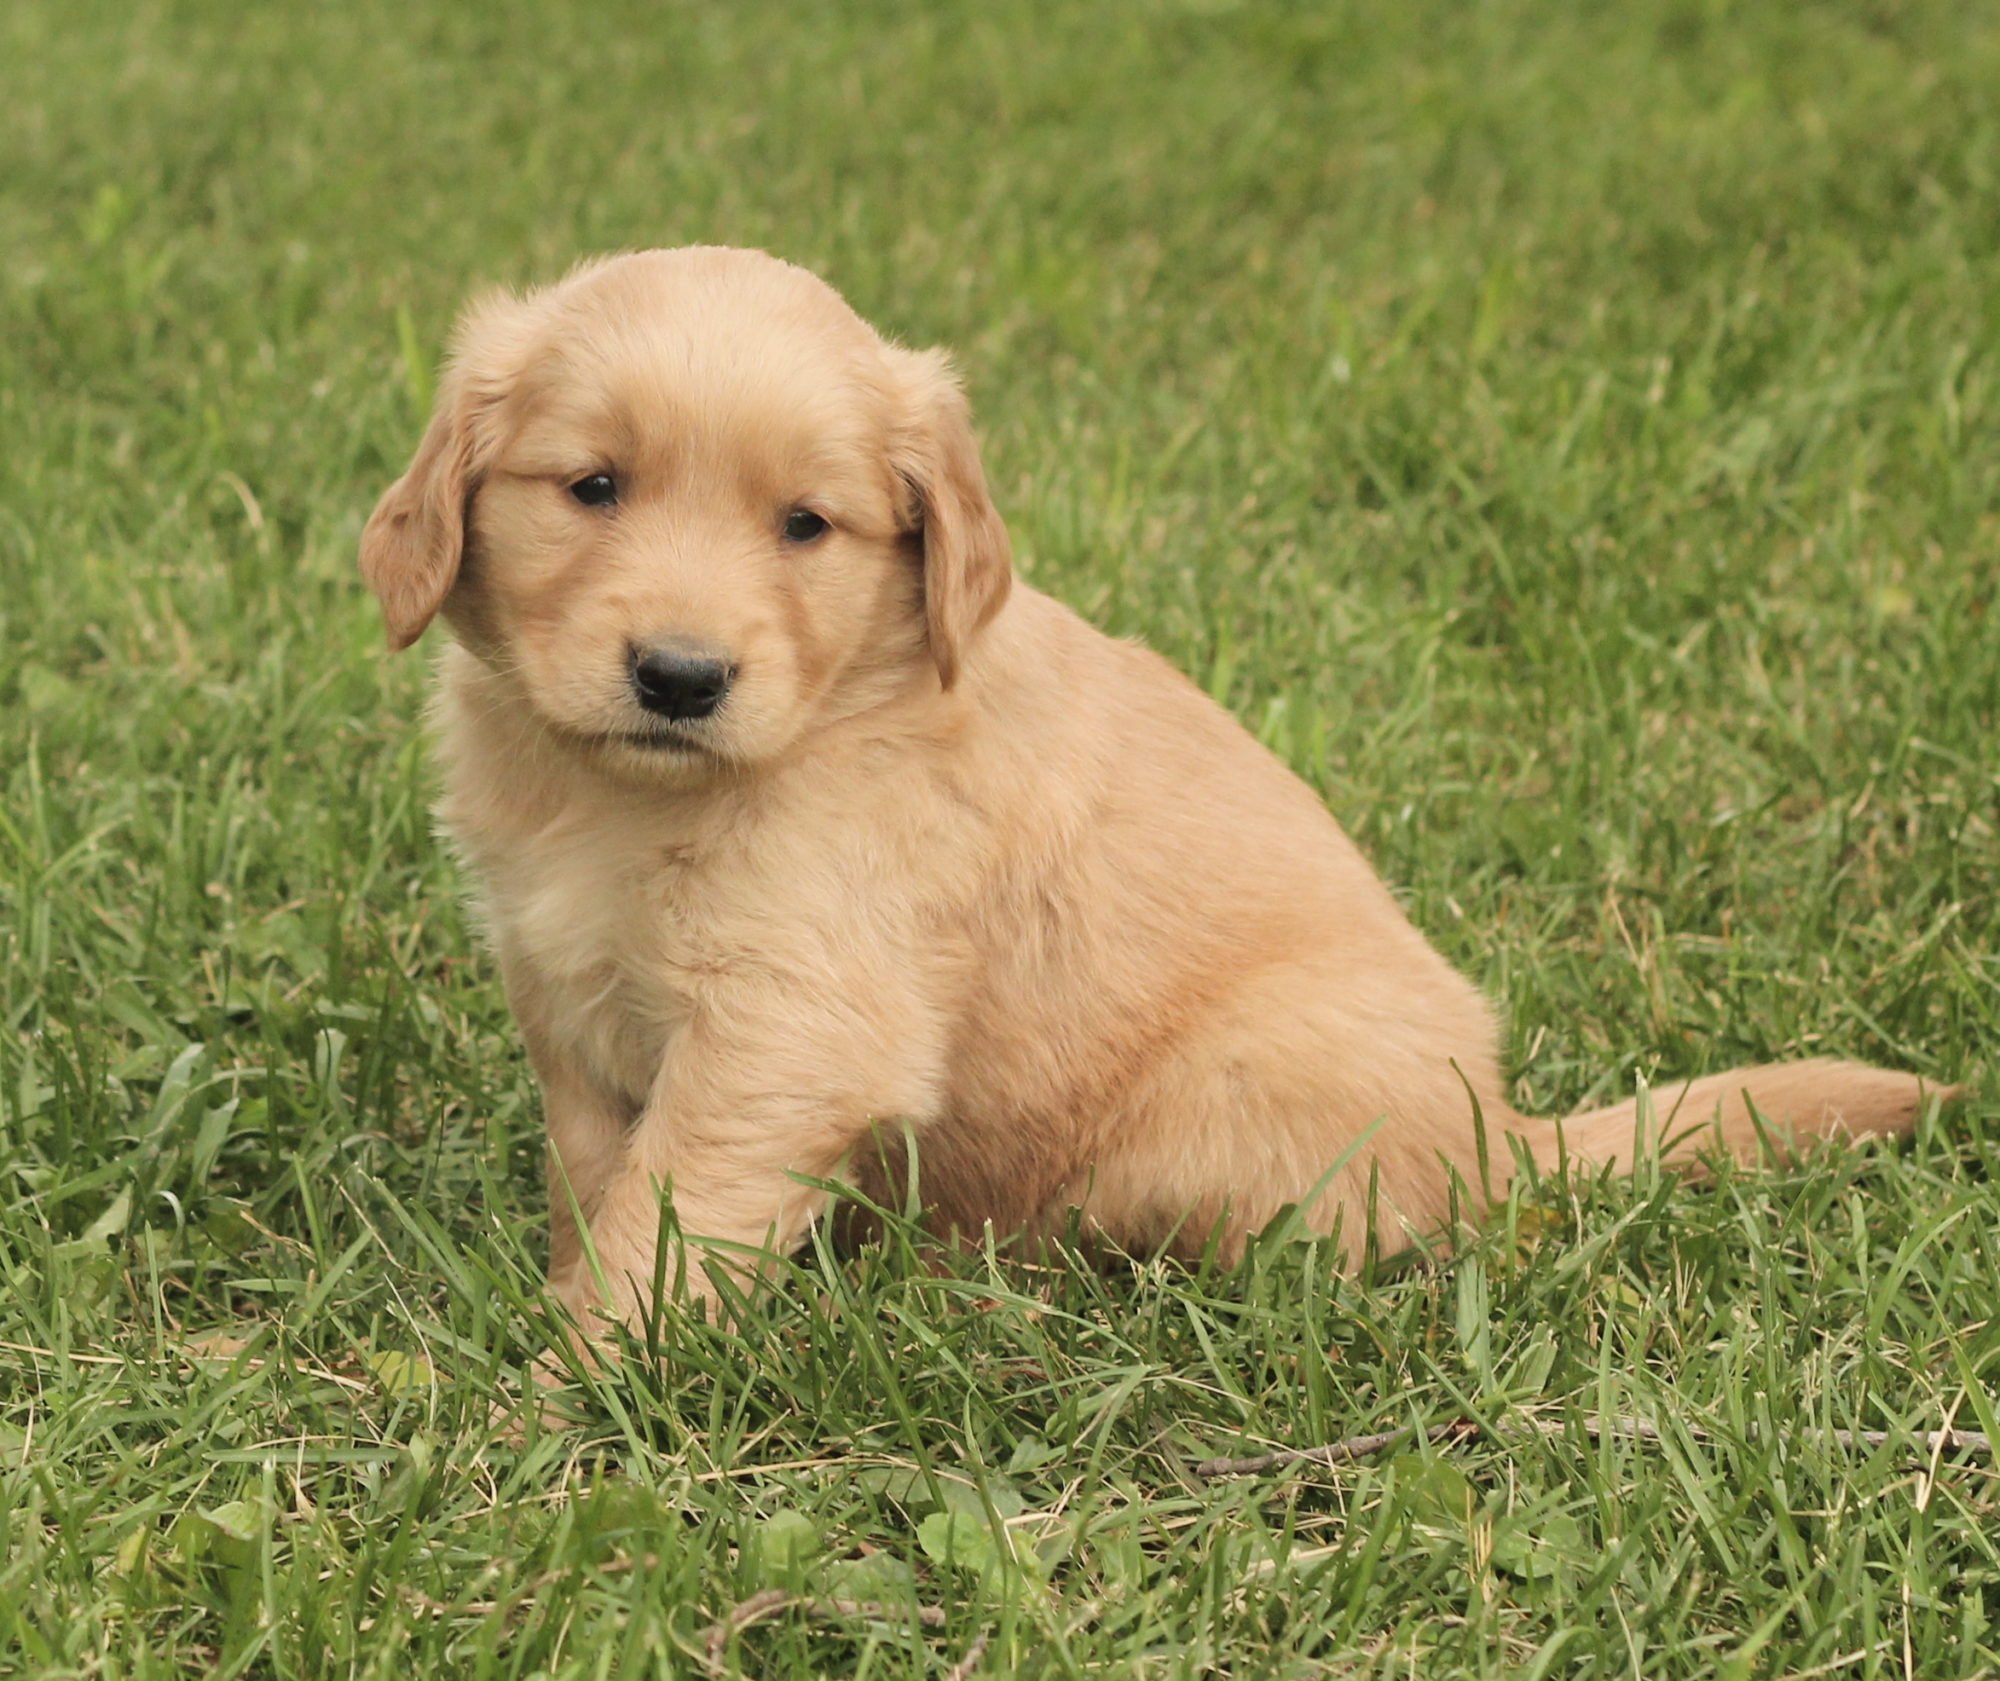 A Boatload of Sunshiny Golden Puppies Photos!